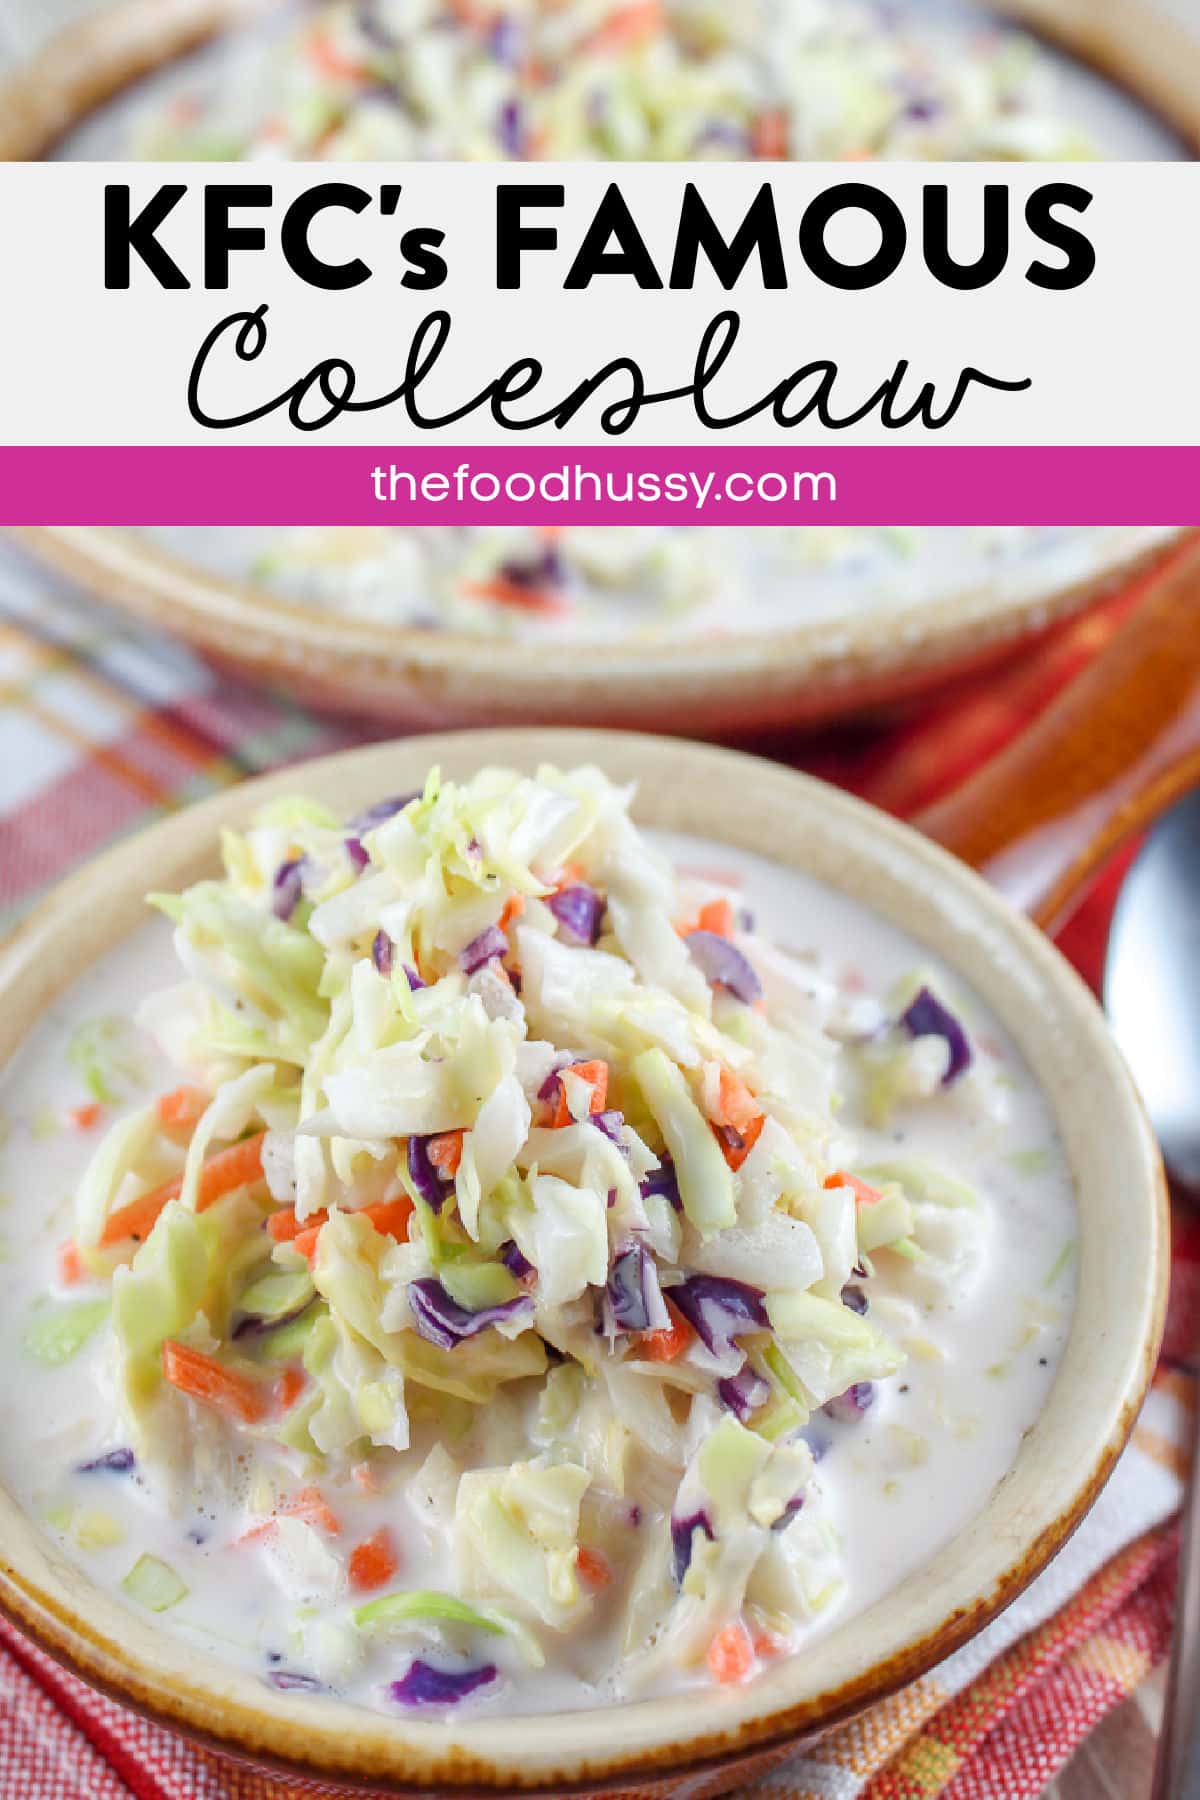 KFC Coleslaw has always been my favorite restaurant side dish! It's creamy and a little sweet and very simple. With spring here, I have been craving coleslaw and made this simple copycat KFC Coleslaw recipe in minutes! via @foodhussy